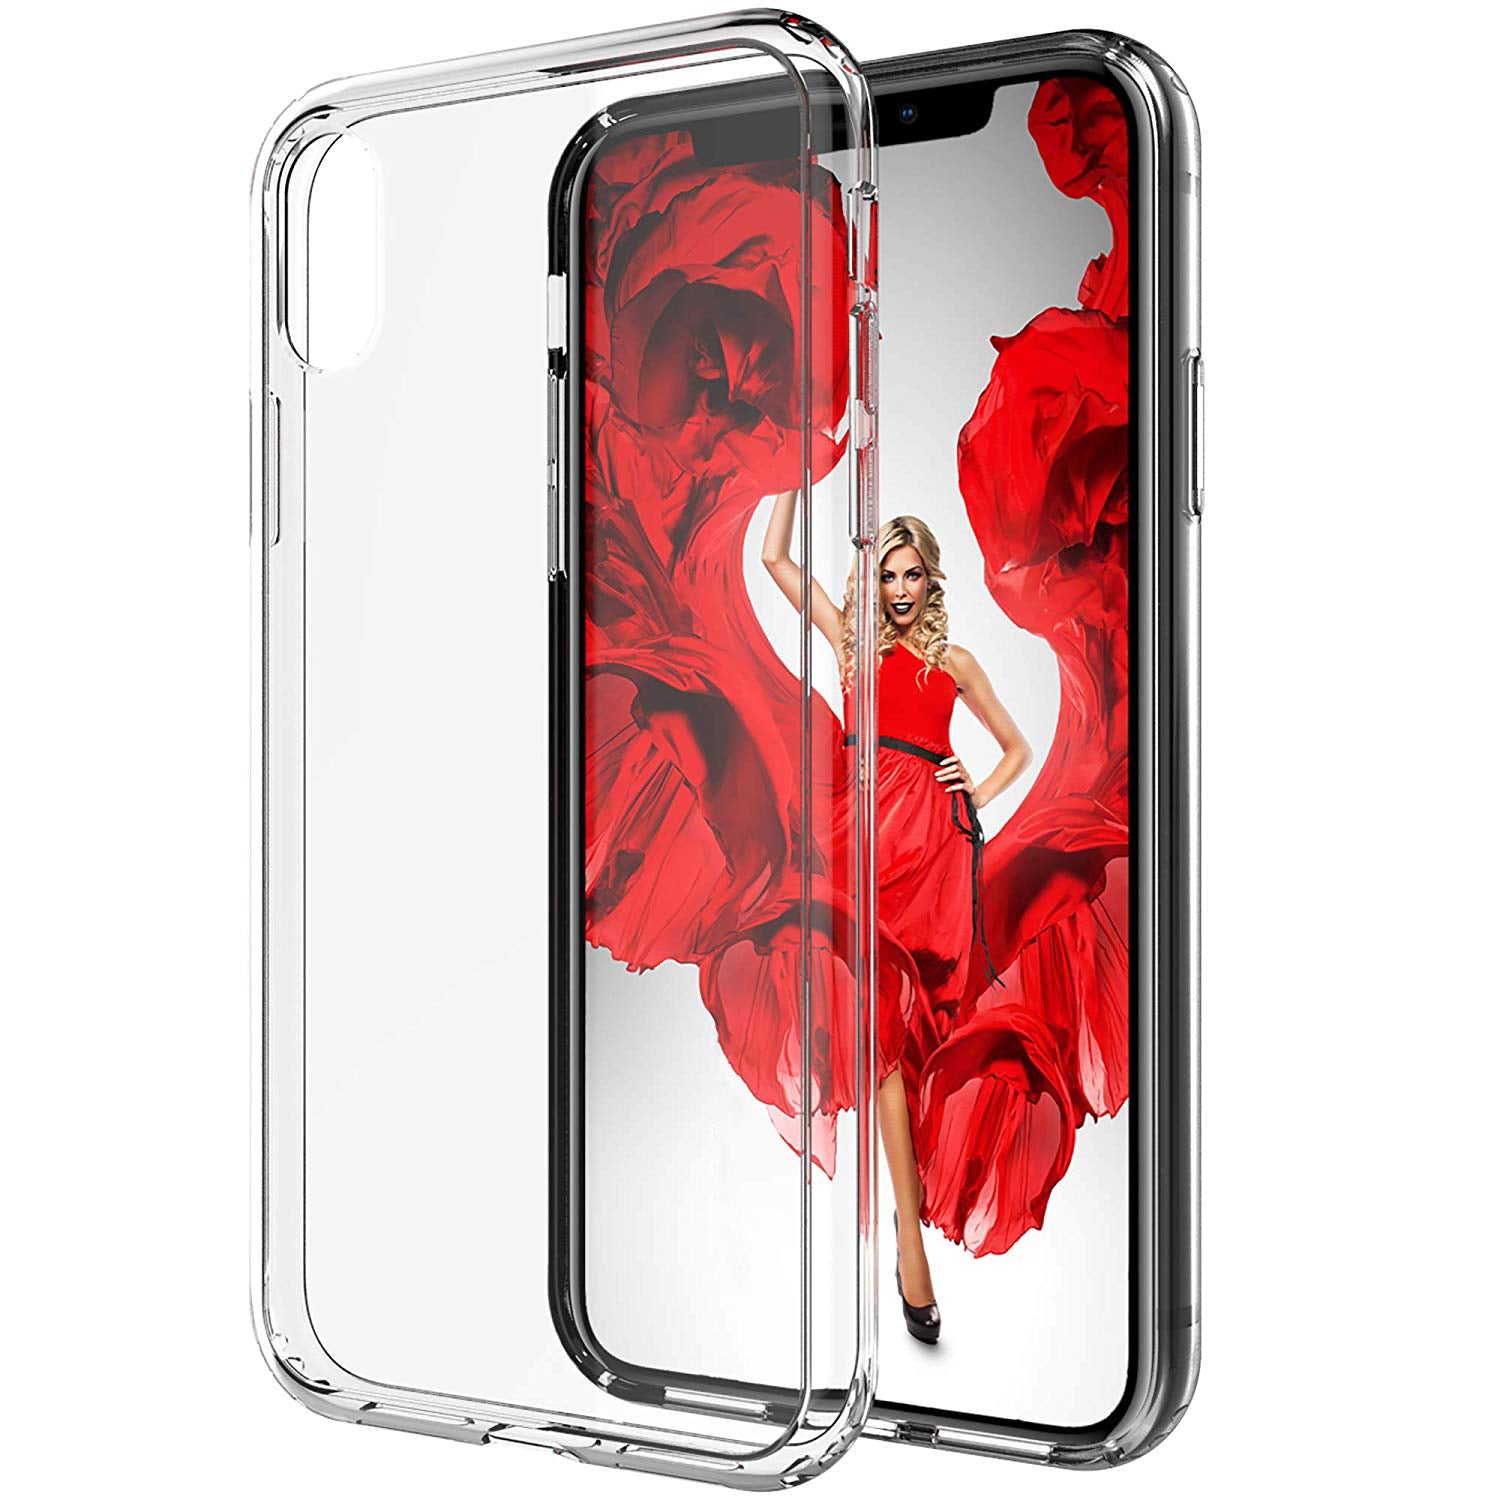 Luvvitt iPhone XS Max Case Clear View Hybrid Cover for 6.5 inch Screen 2018